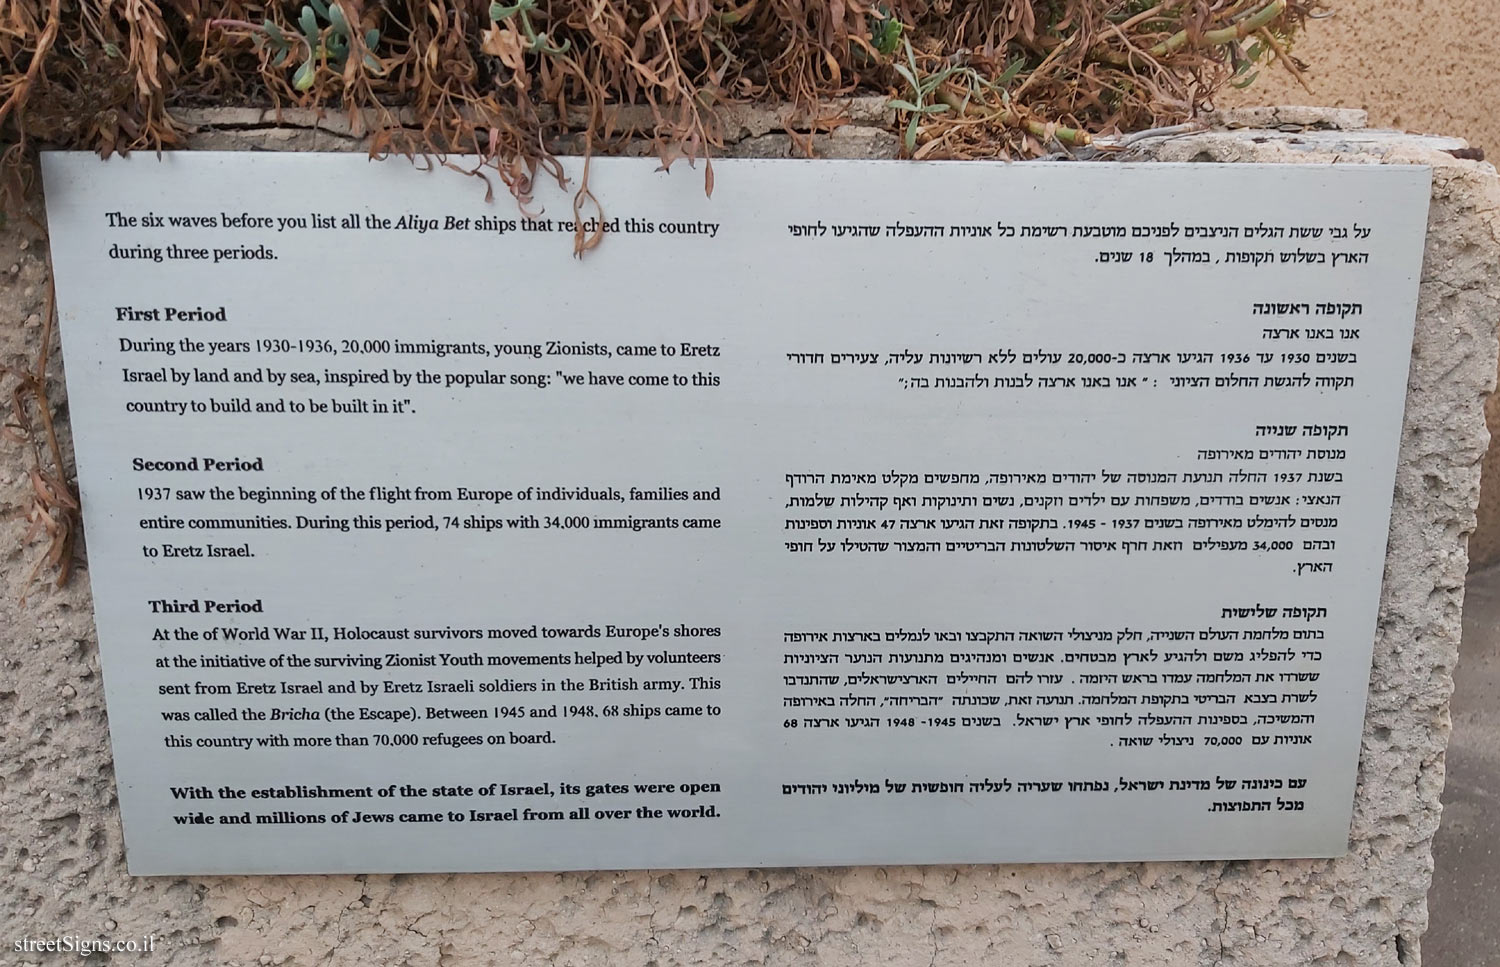 Tel Aviv - London Garden - The story of the illegal immigration - The periods of immigration